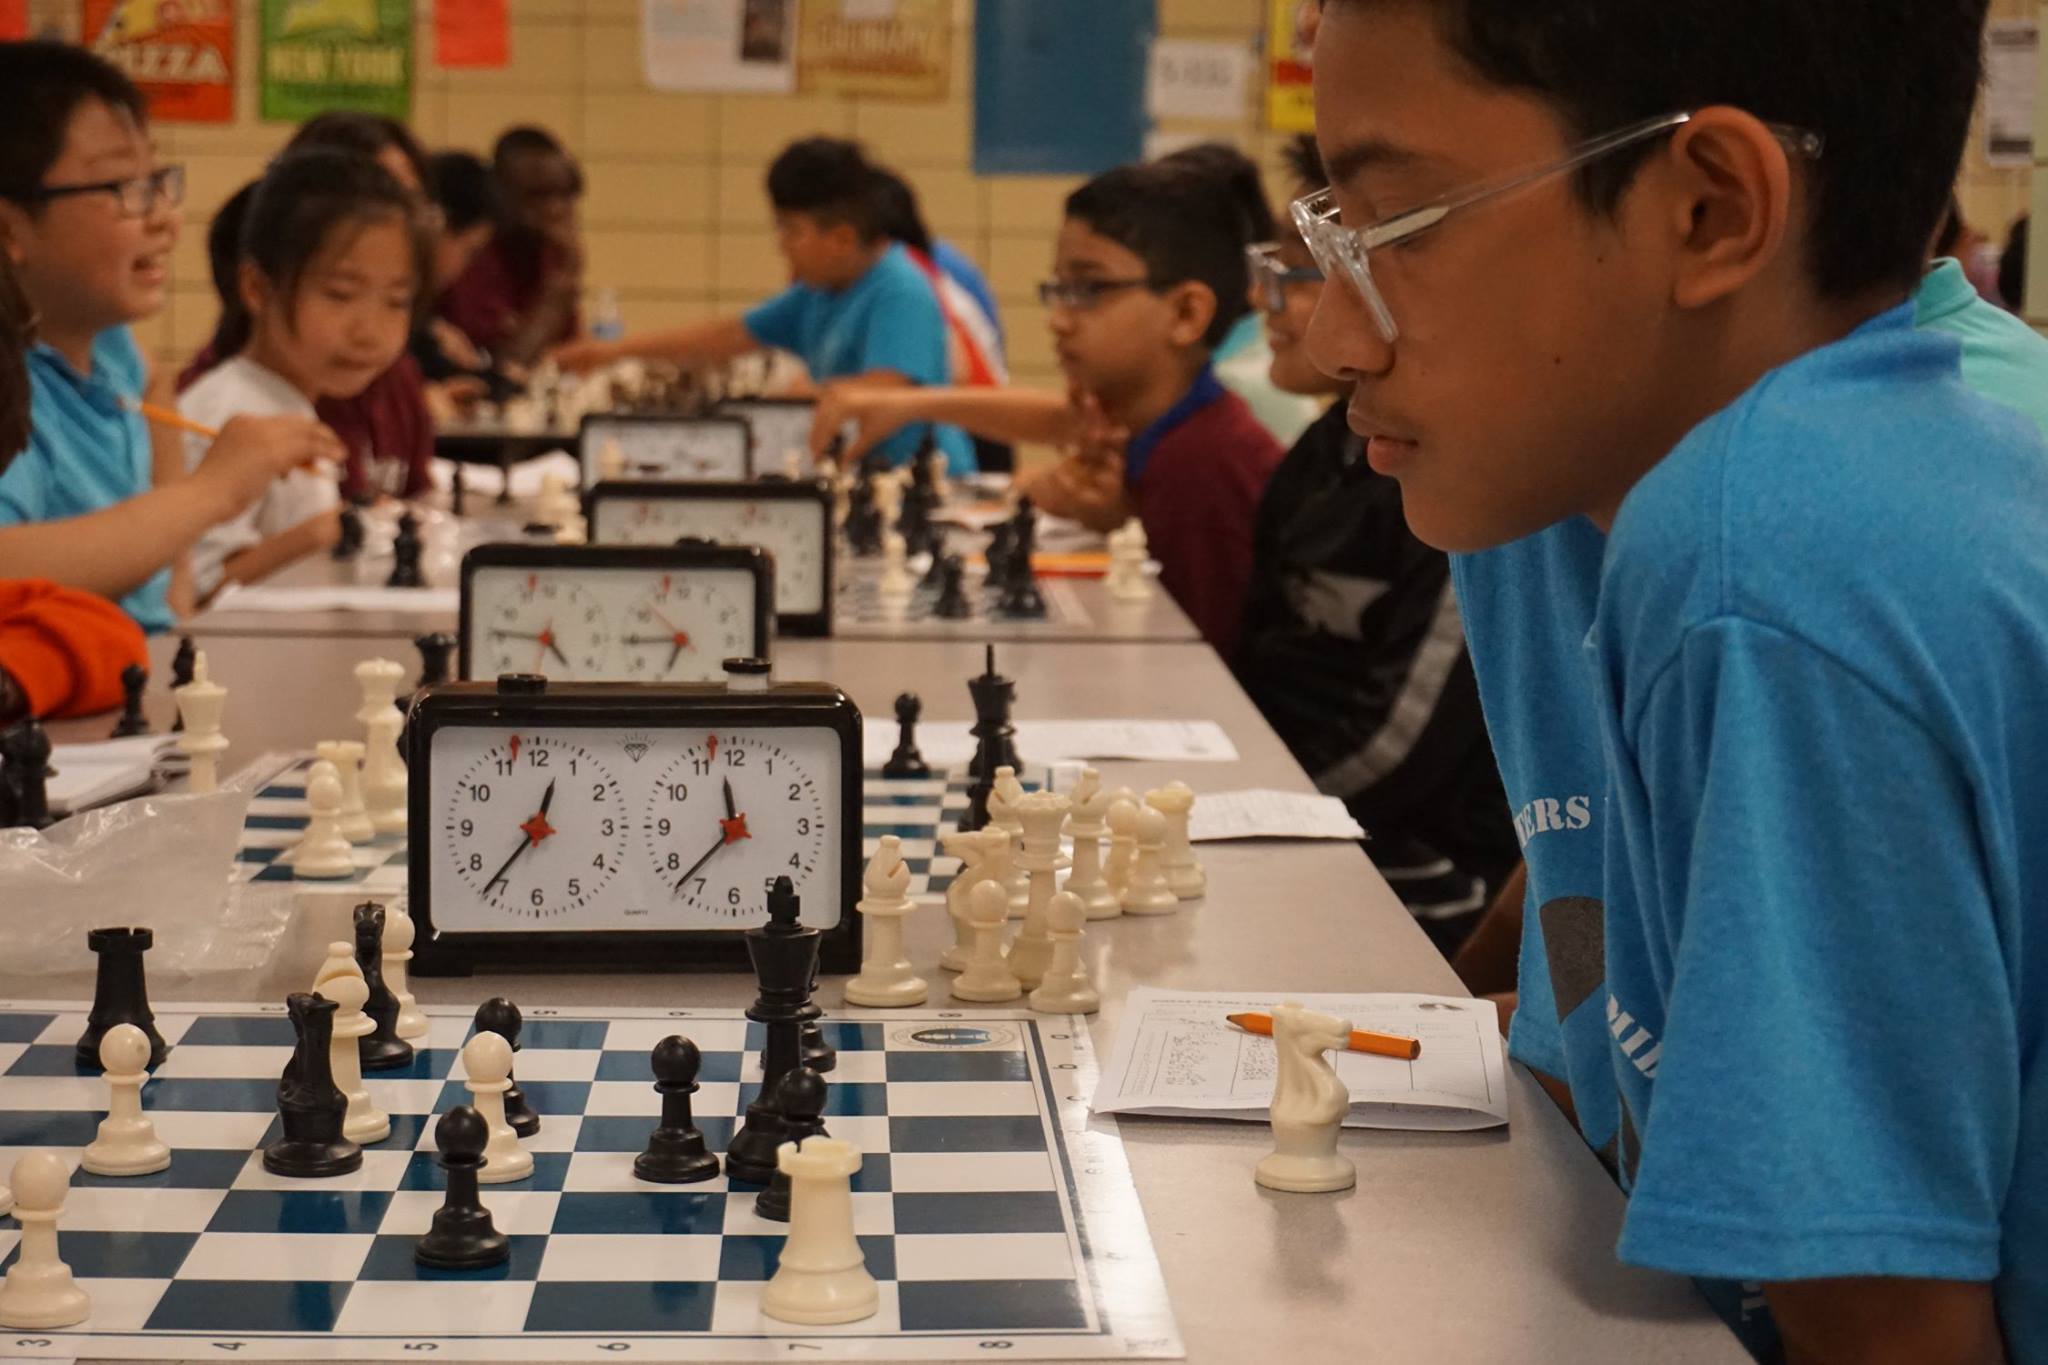 Tournaments  Complete Chess